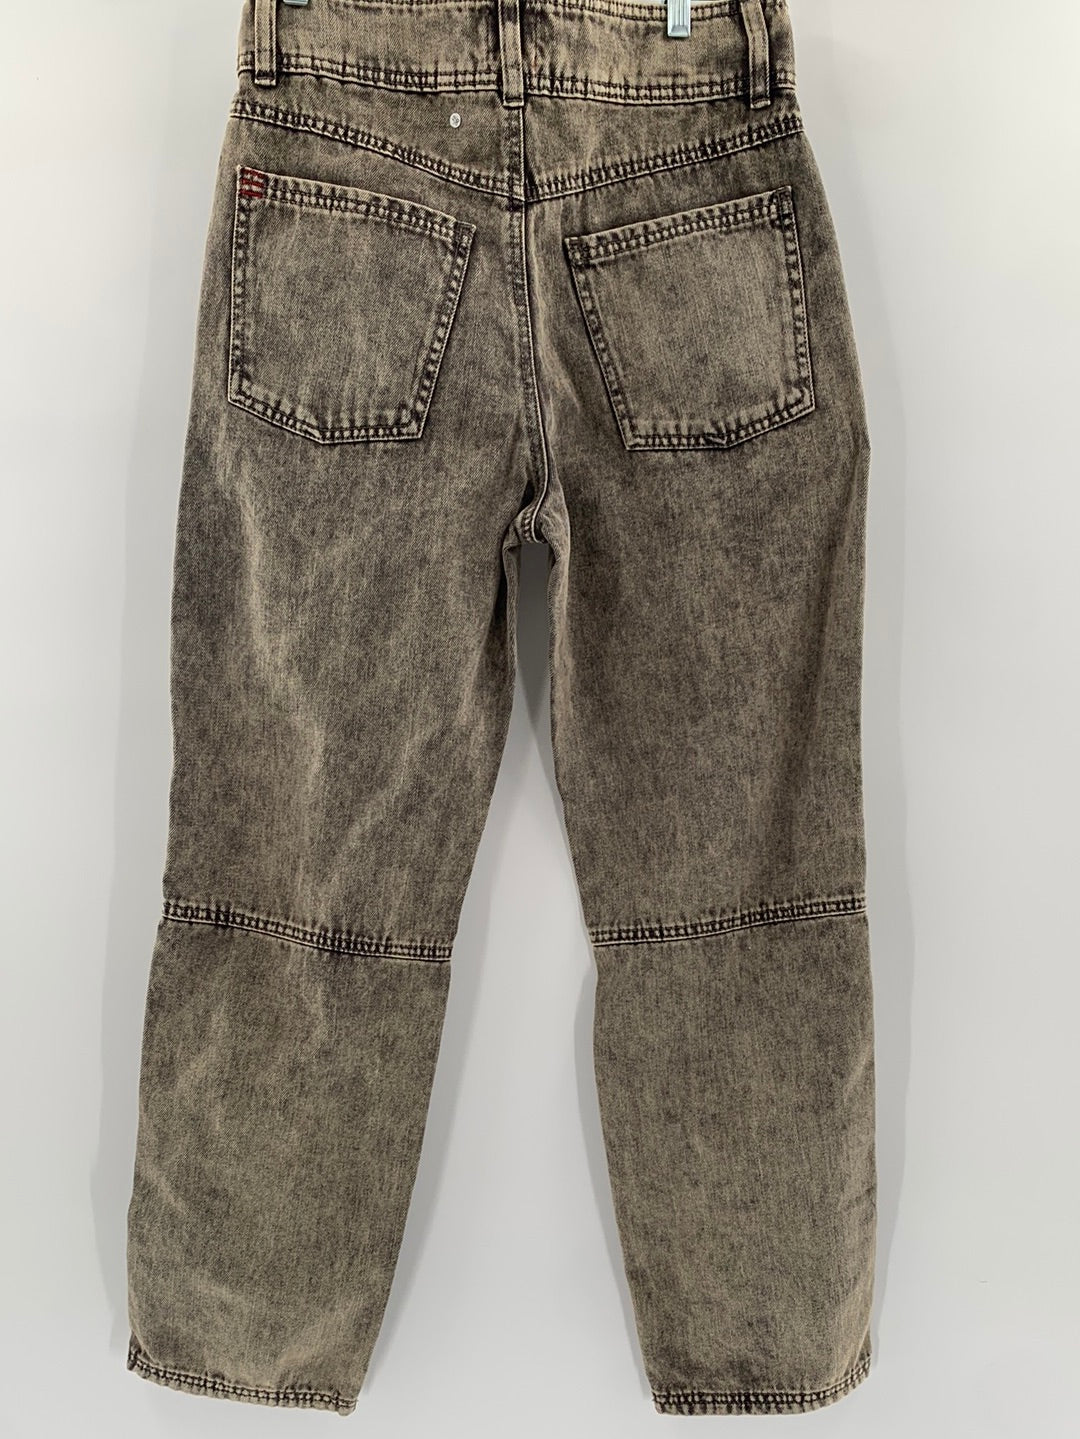 BDG Urban Outfitters Straight Leg Jeans (Size 27)